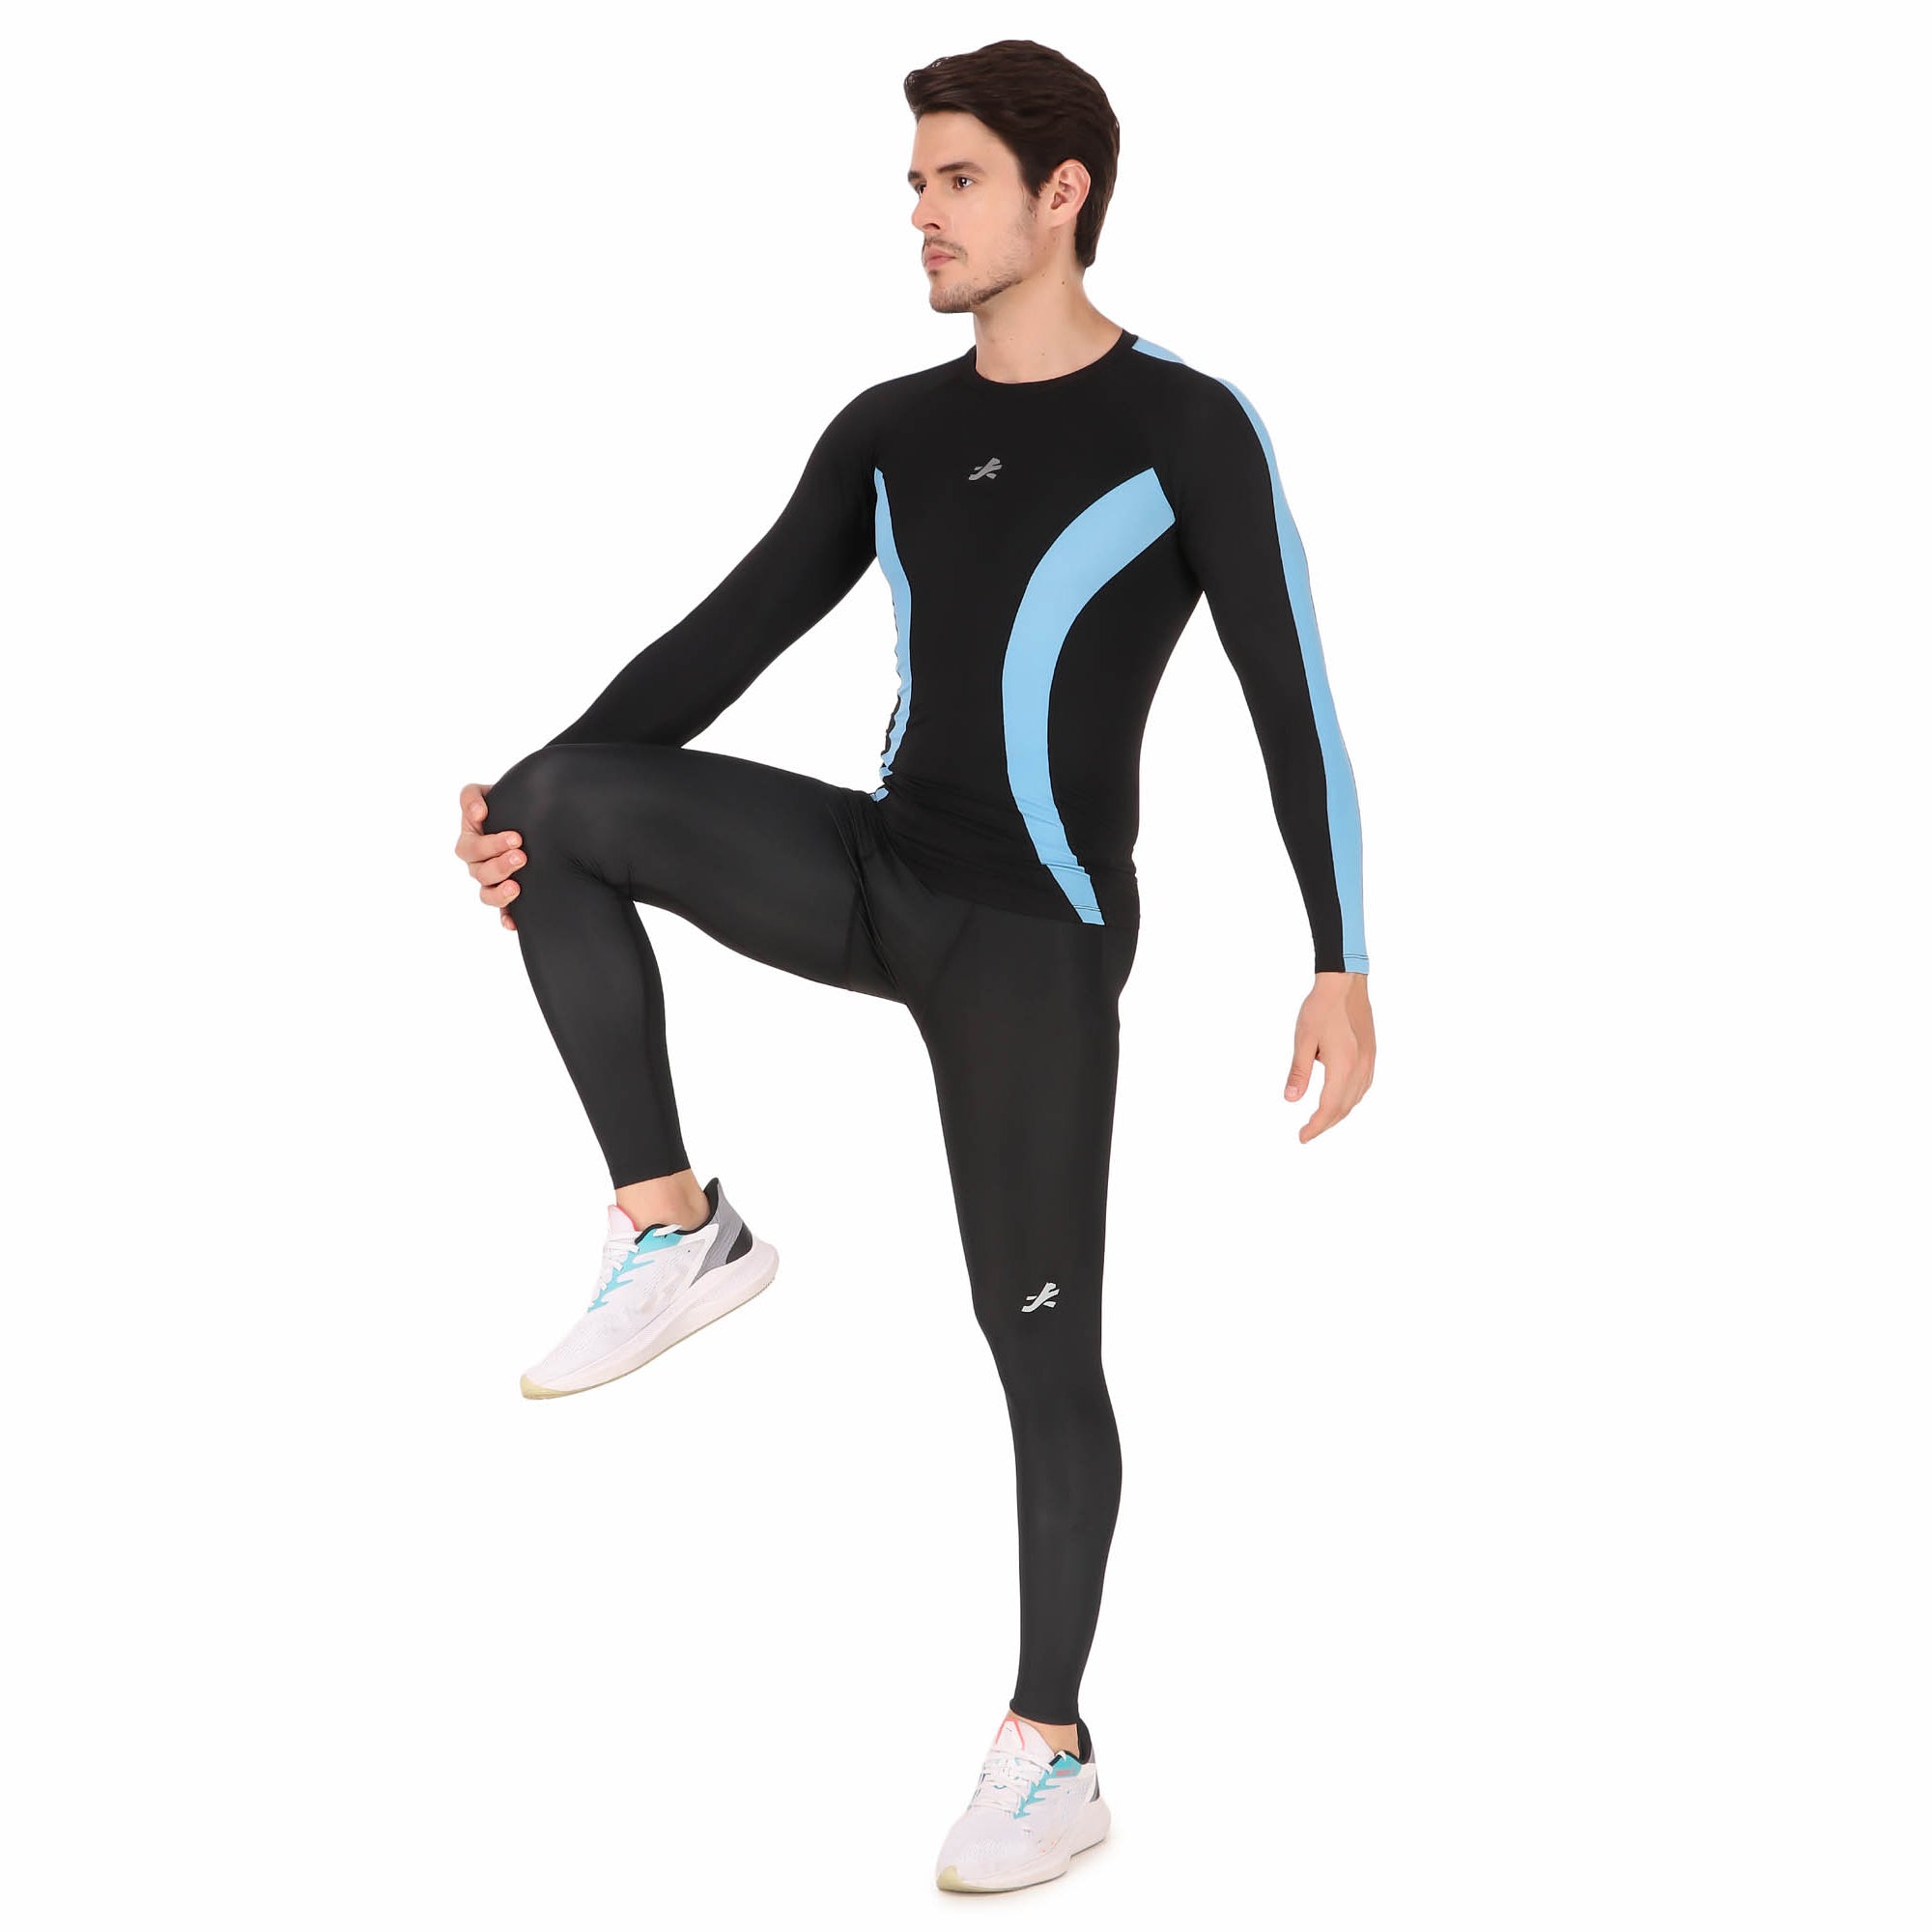 ReDesign Nylon Compression Top Full Sleeve (BLACK/SKY BLUE)